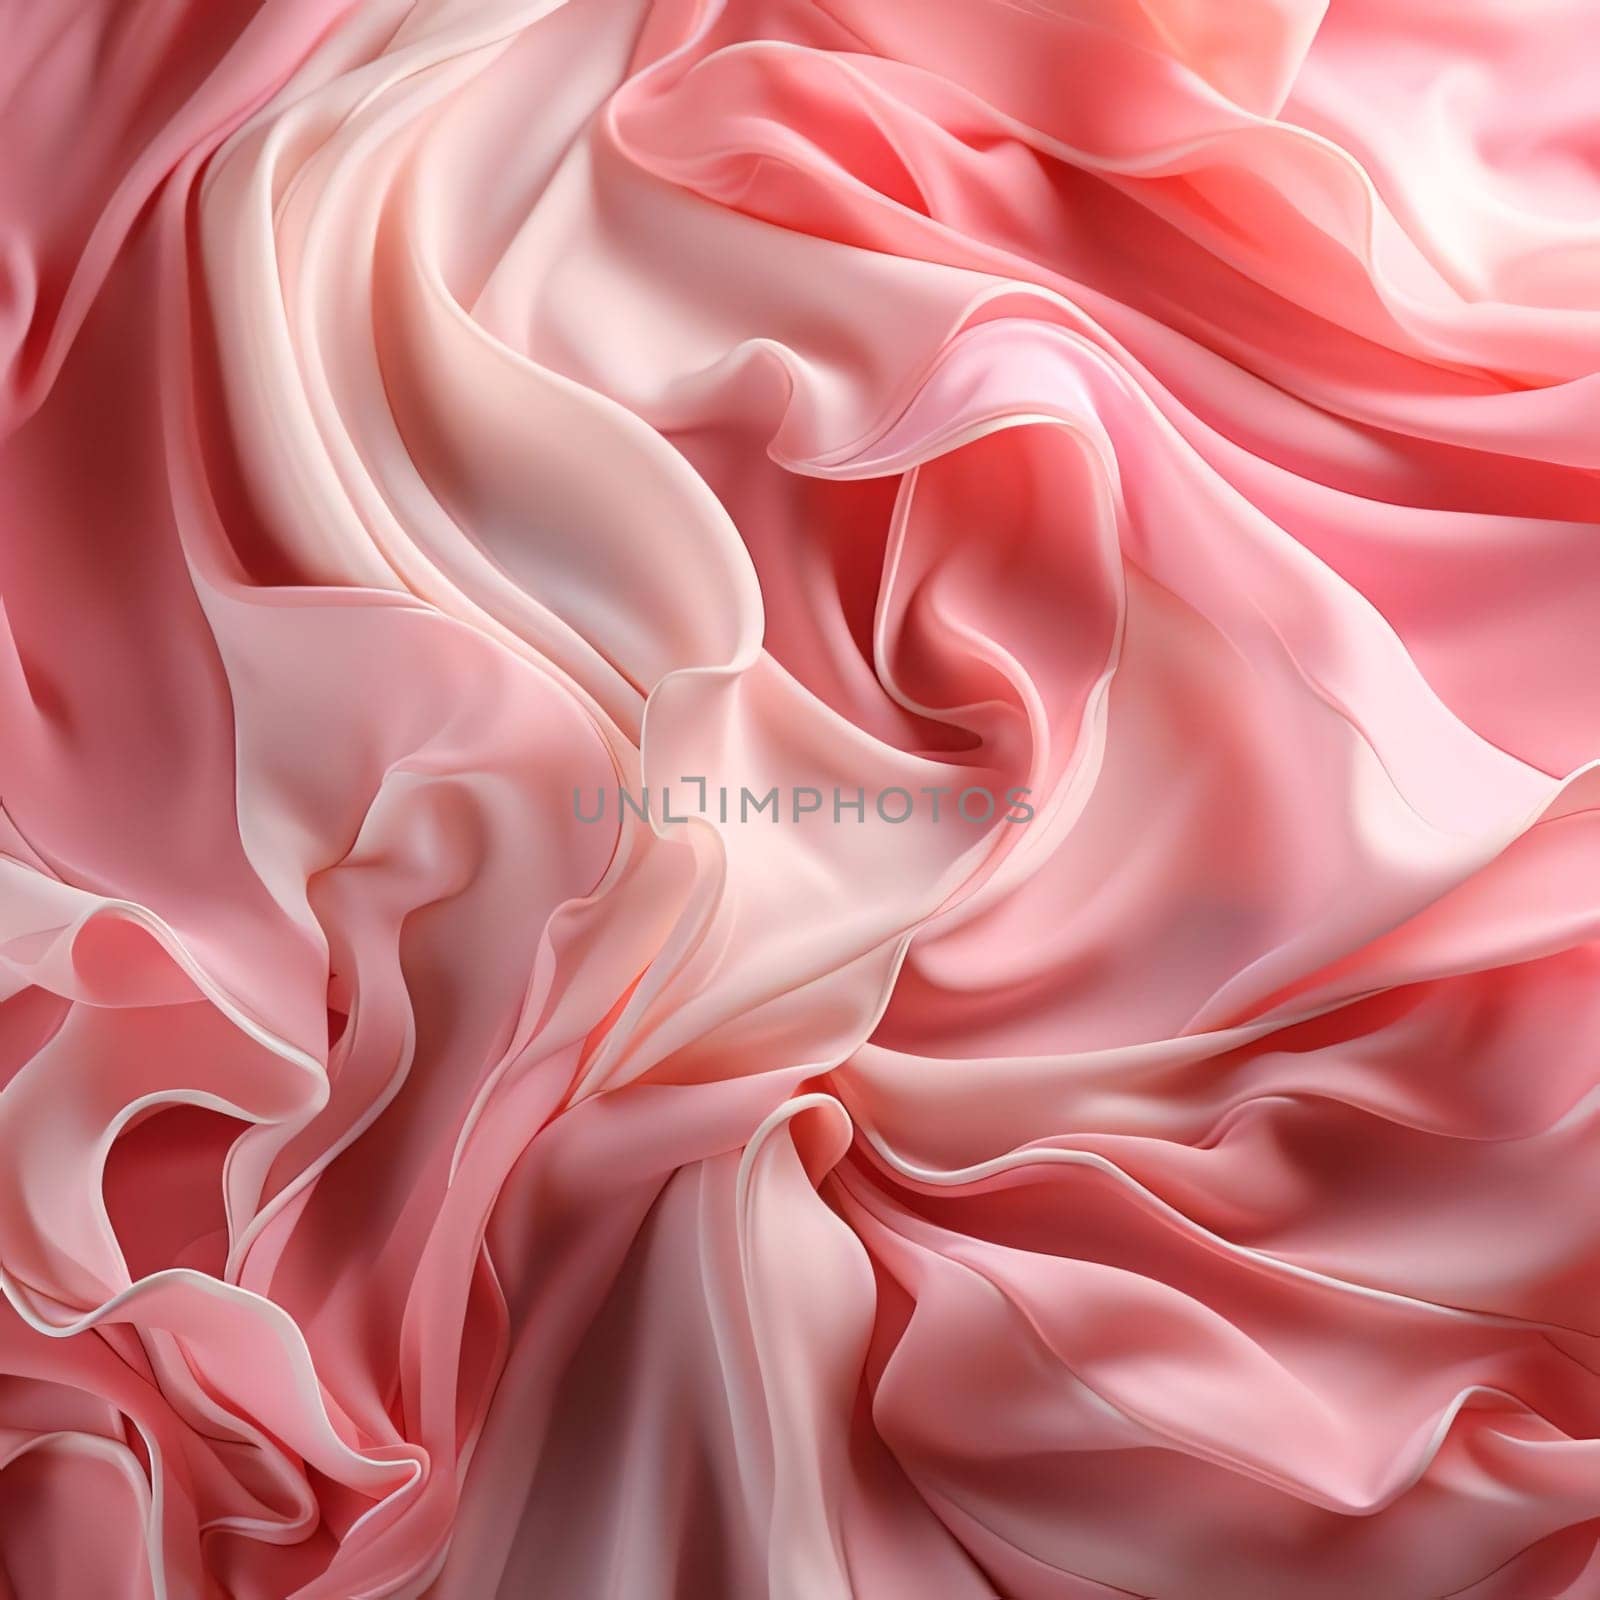 Abstract background design: abstract background of elegant pink silk or satin wavy folds